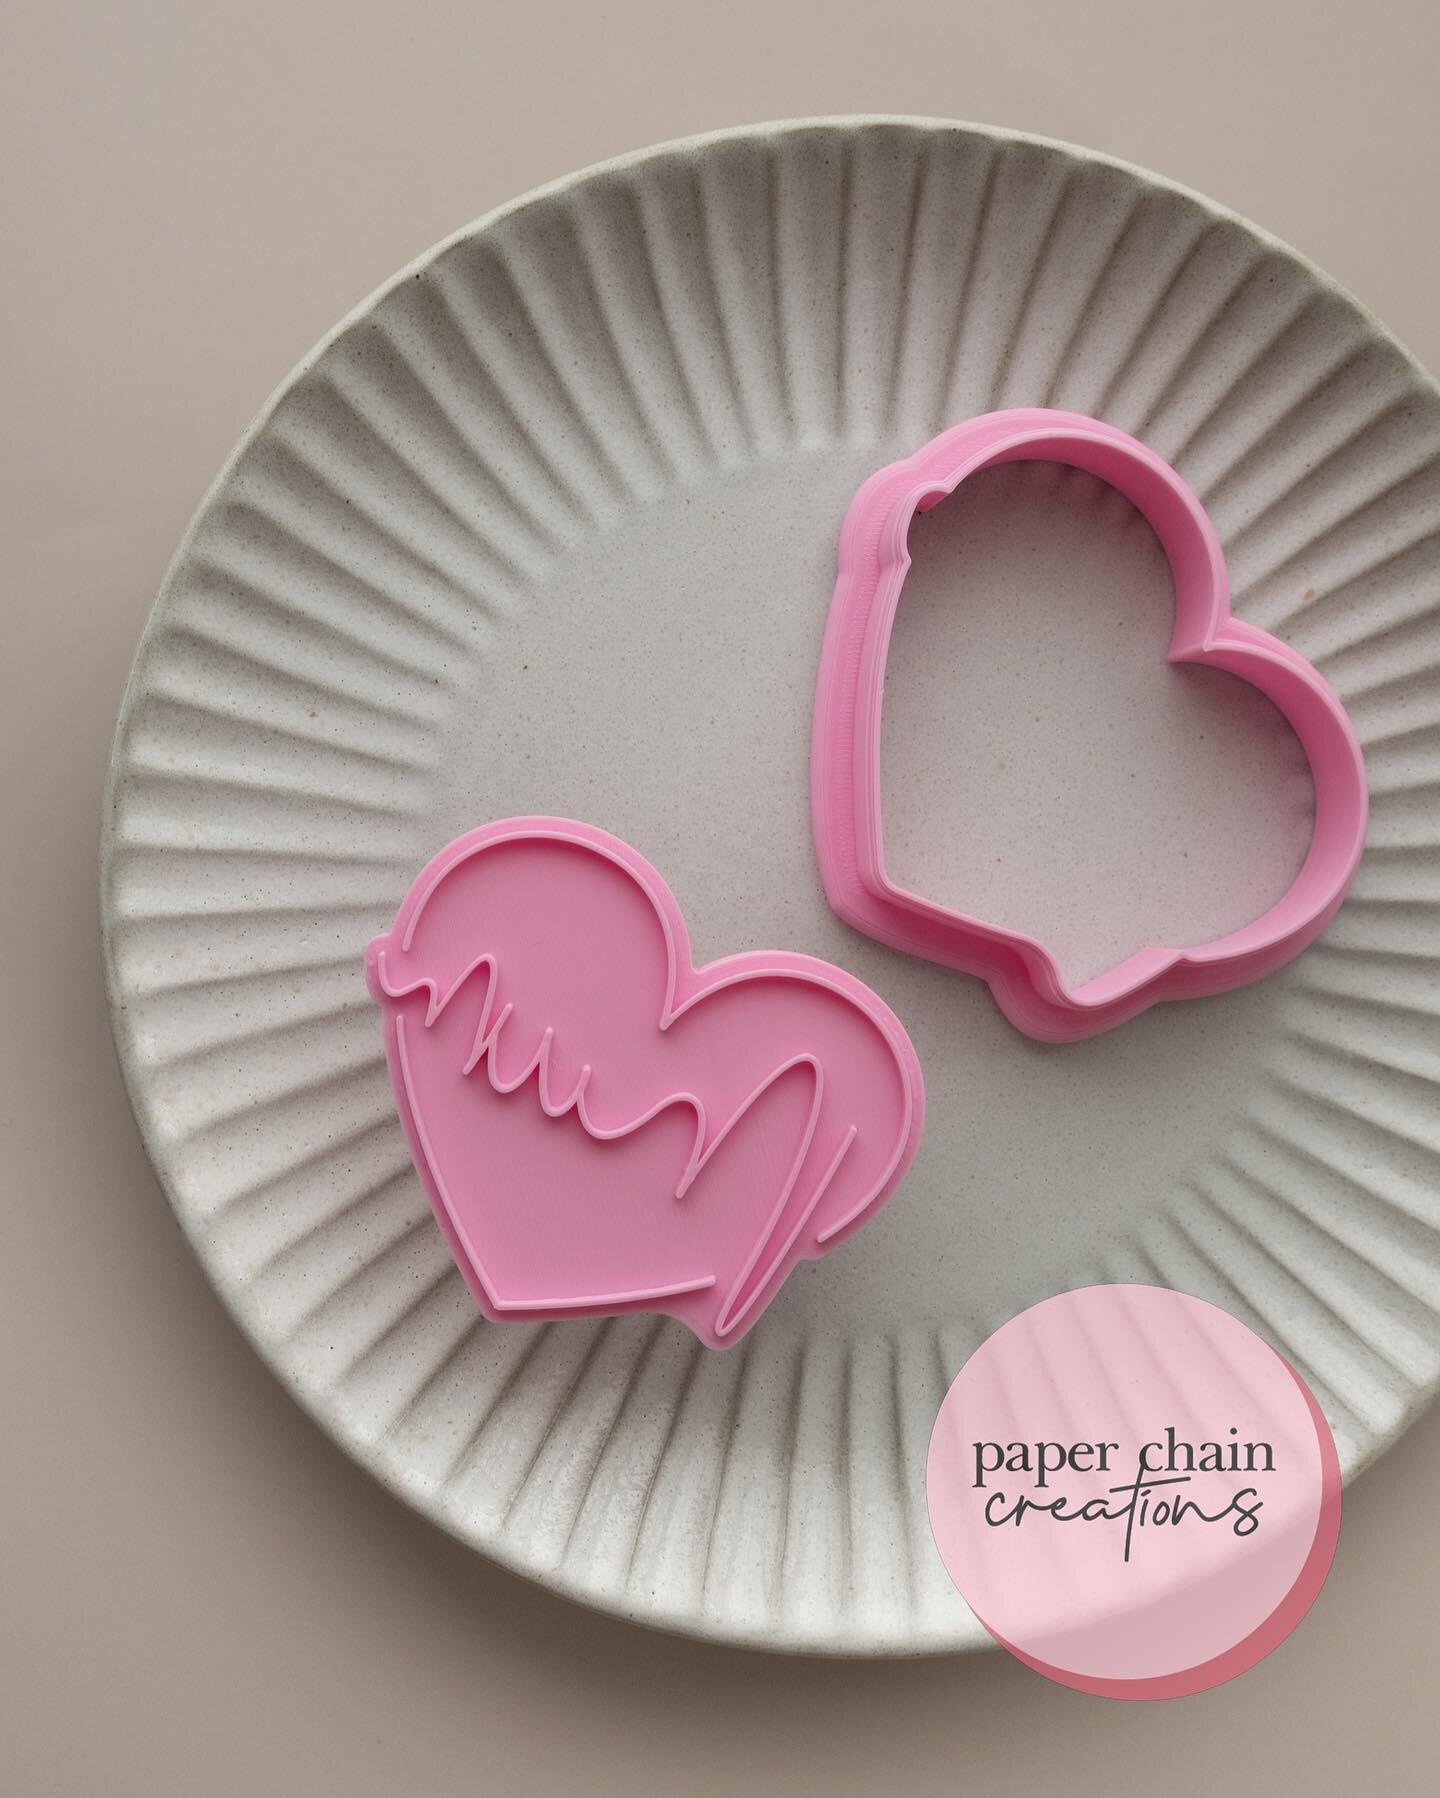 💕 SALE 💕
.
New Mother&rsquo;s Day designs are up! Shop now with a 20% off sale happening now! Sale until 17/4 at 11:59pm. Discount is automatic and shows at the checkout!
.
#fondantcookies #cookiecutters #cookies #paperchaincreations #customcookies